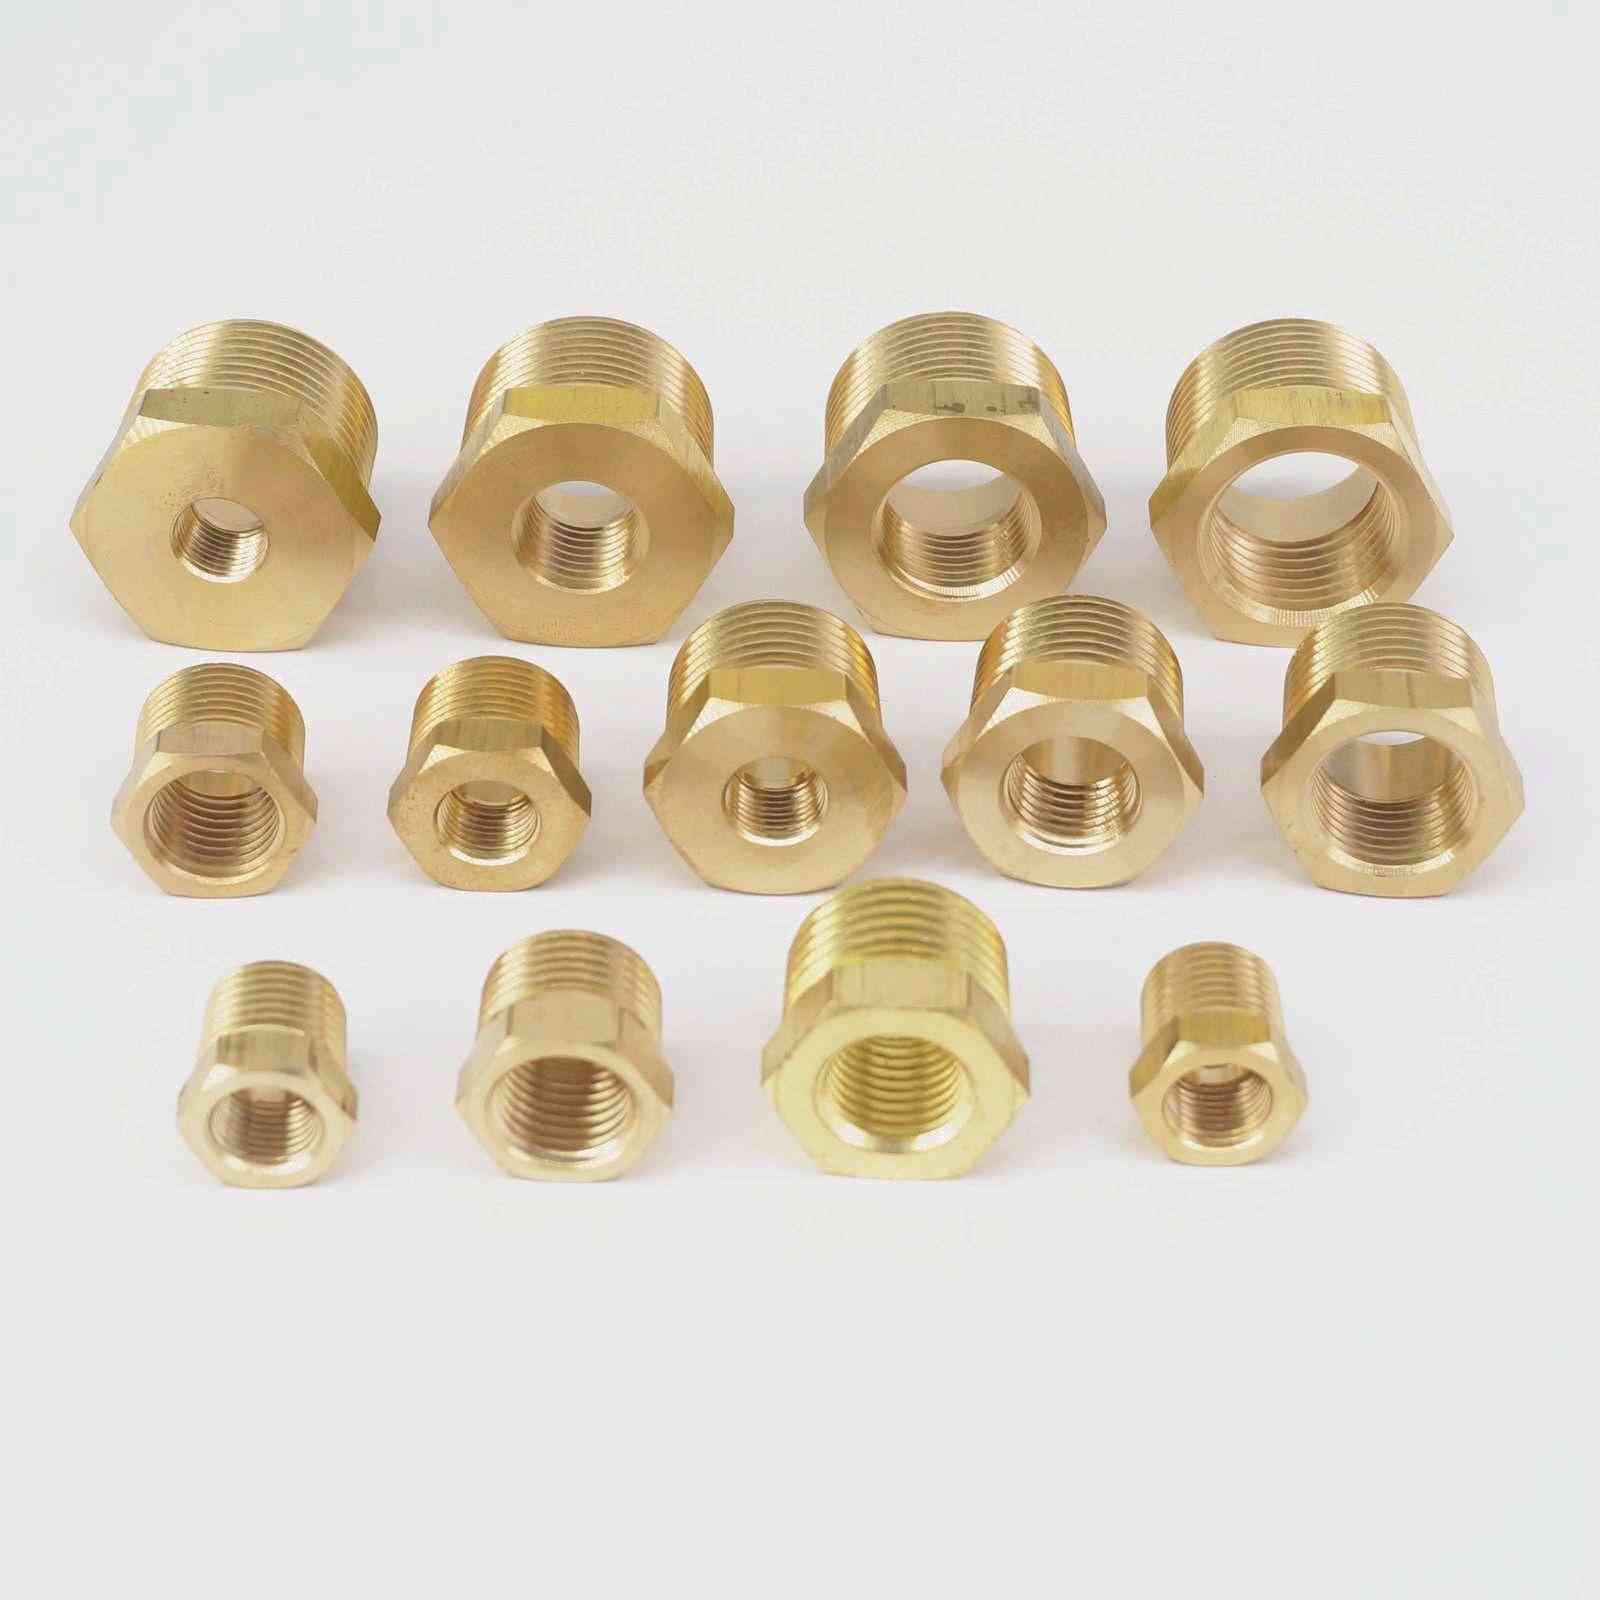 Npt Bspt Male X Female Brass Reducing Bushing Pipe Fittings Connectors Adapter Air Gas Fuel Water